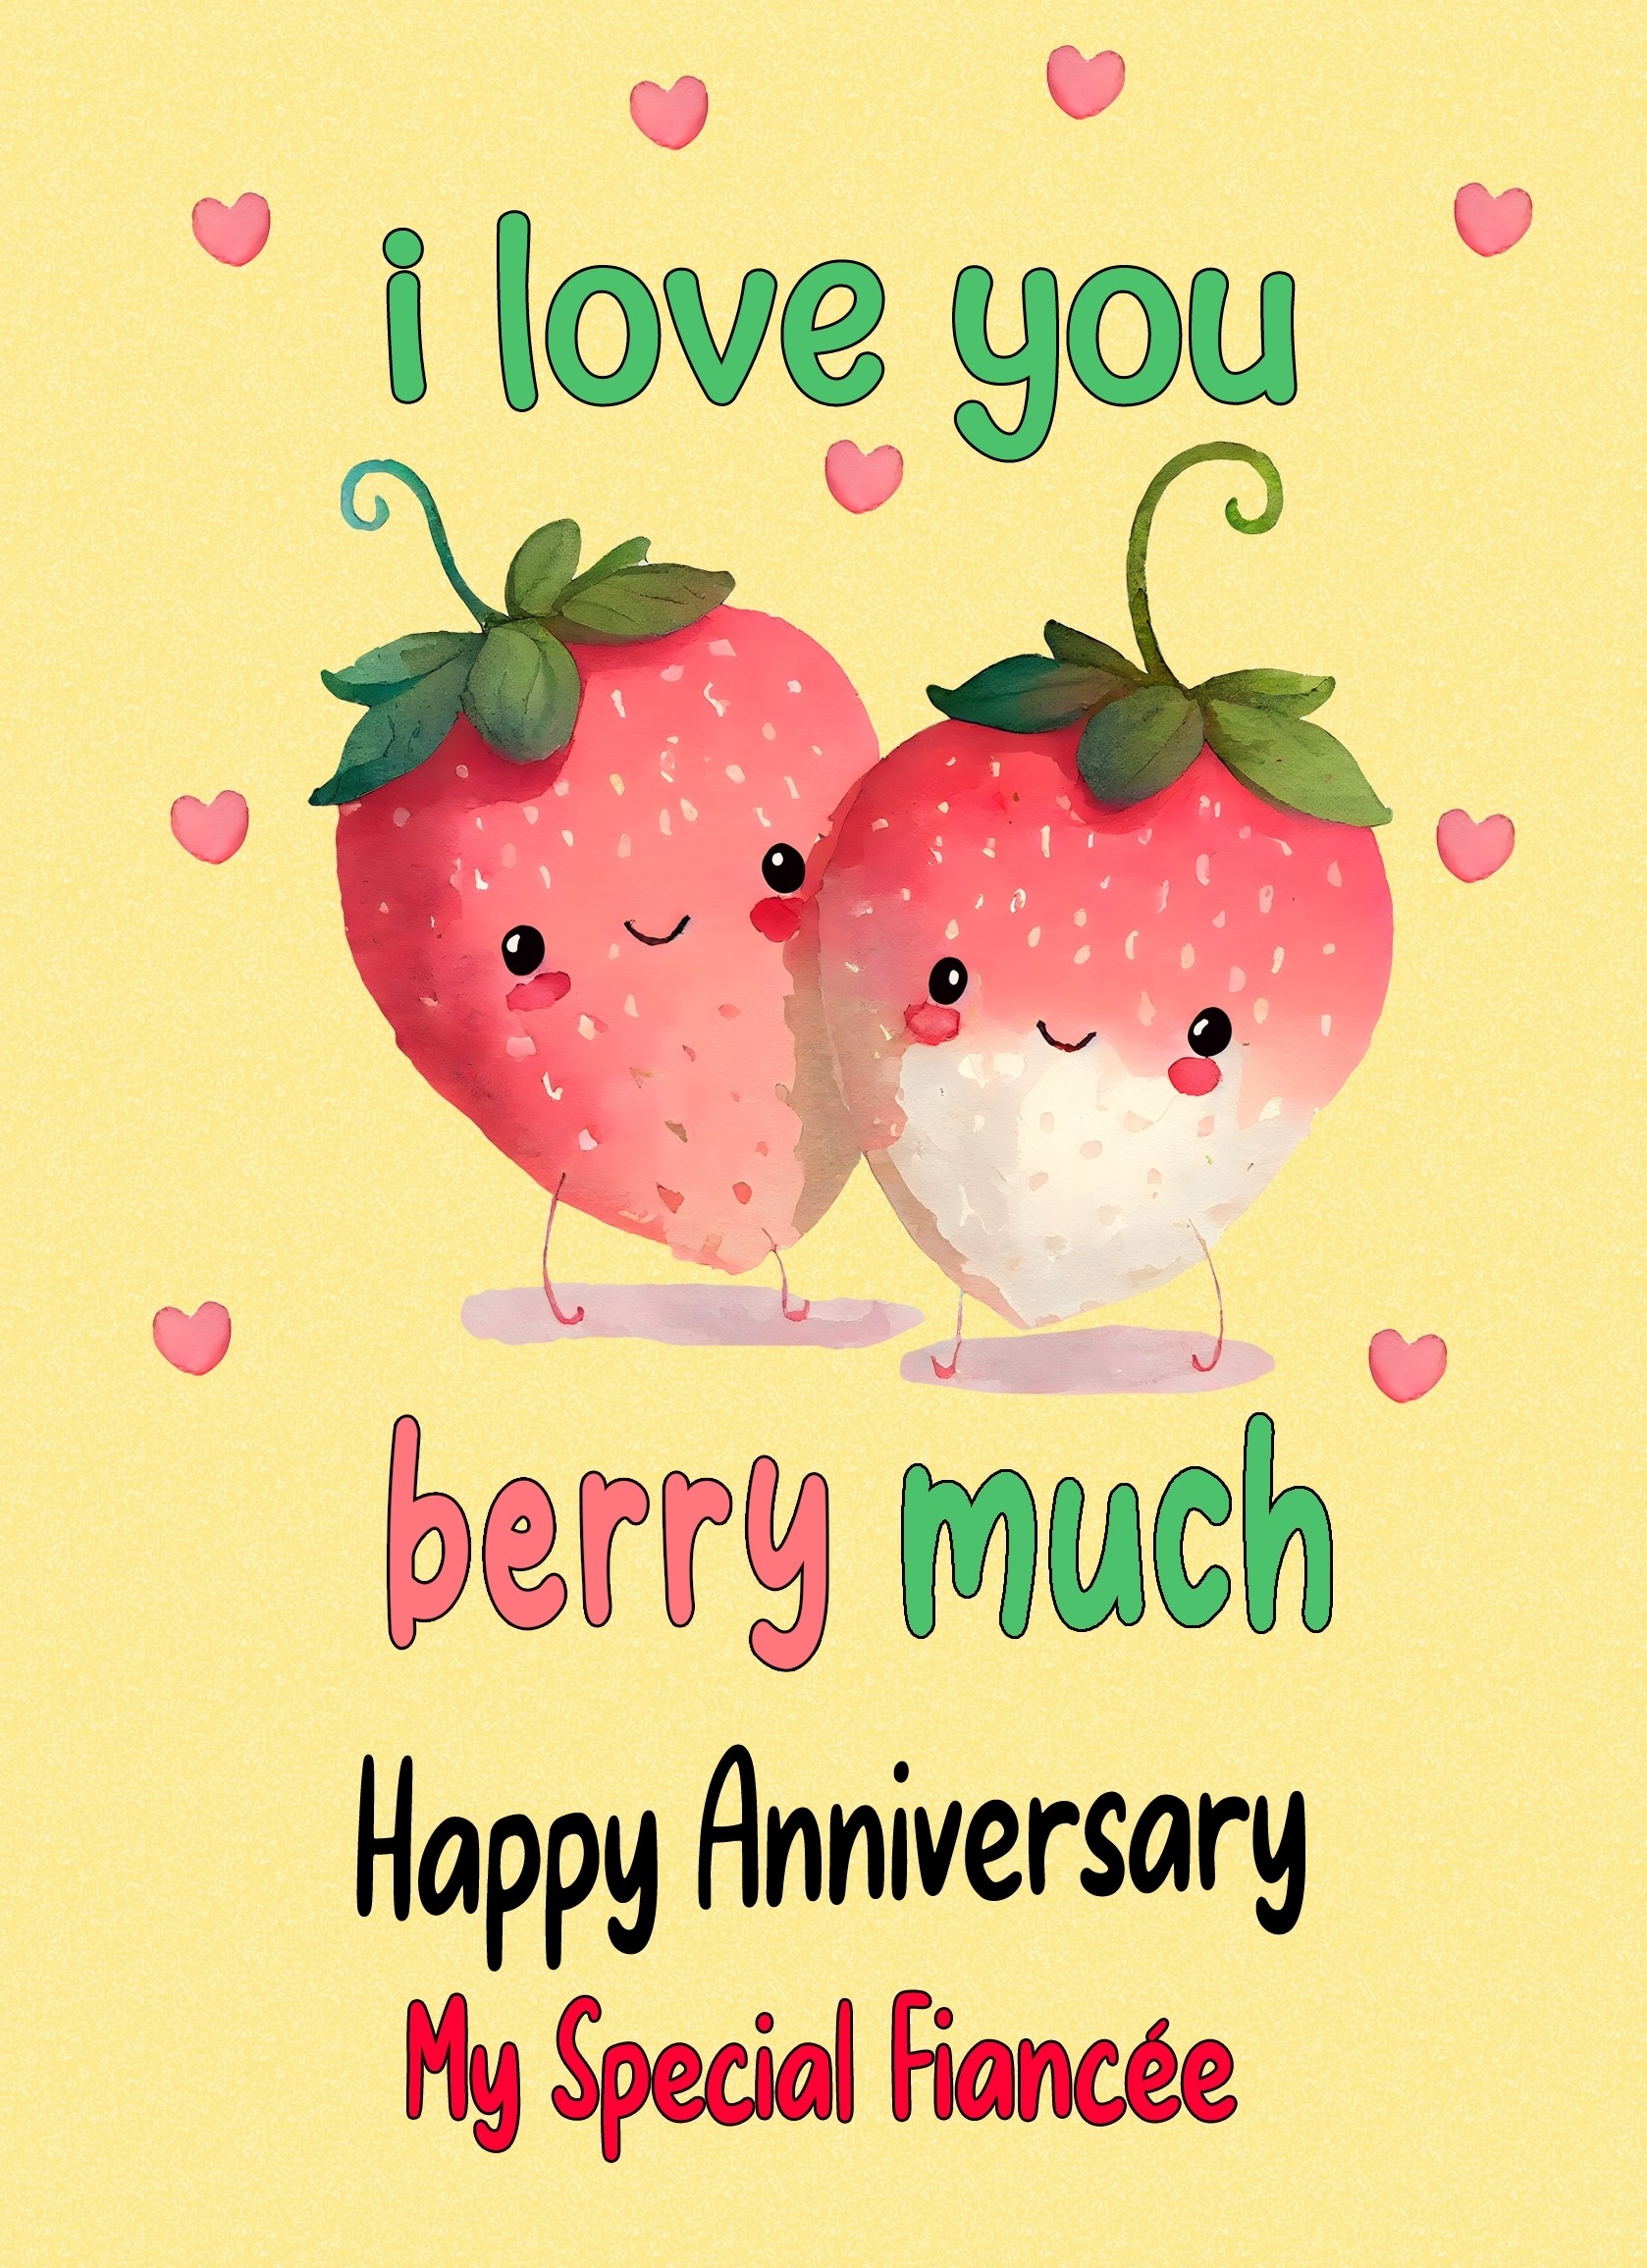 Funny Pun Romantic Anniversary Card for Fiancee (Berry Much)